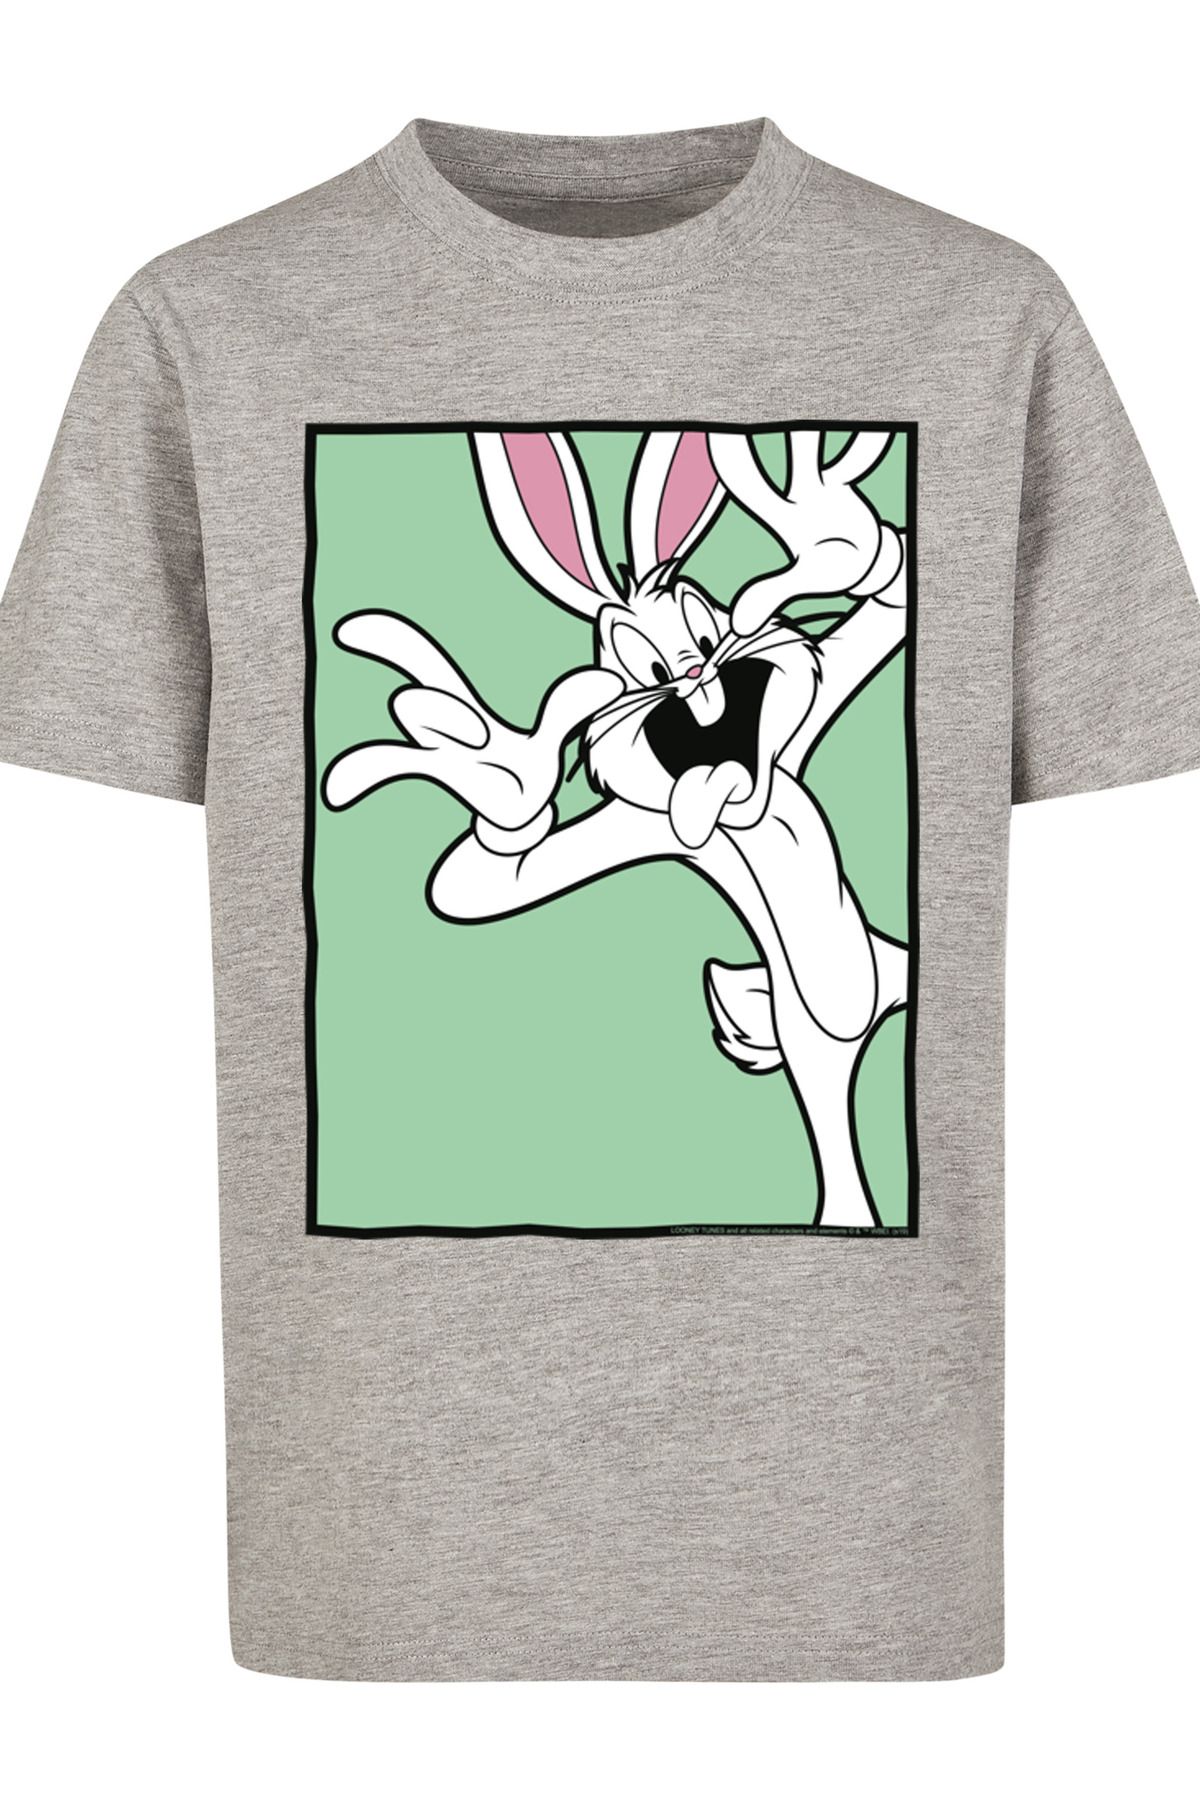 Bugs T- Tunes Face-WHT Looney Shirt mit F4NT4STIC Bunny Funny - Basic Kinder Trendyol Kids